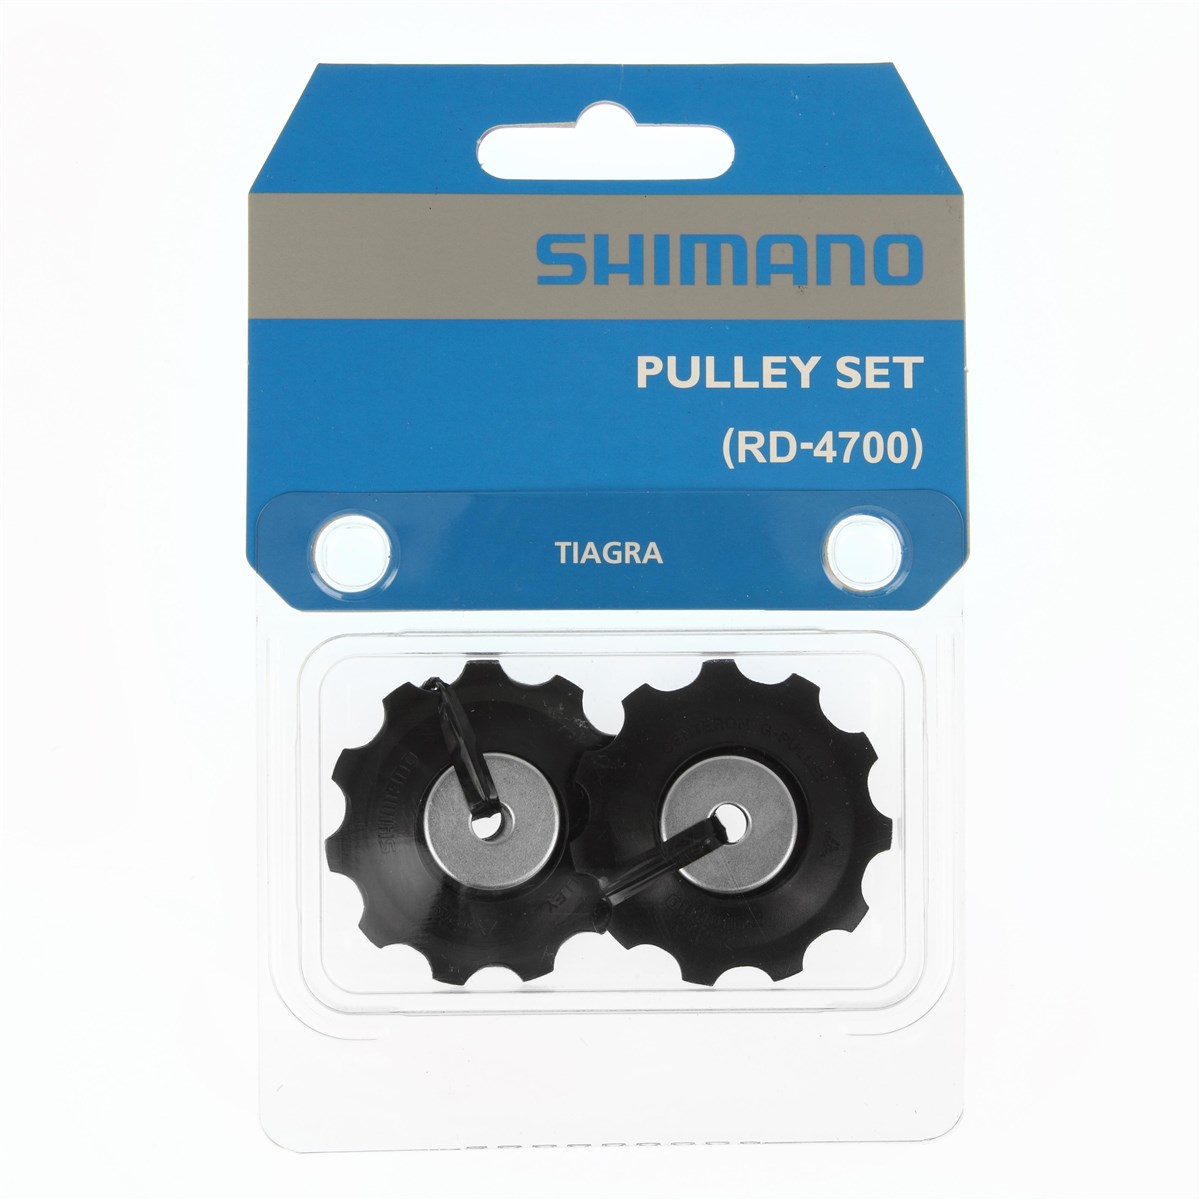 Shimano Tiagra RD-4700 Tension and Guide Pulley Set product image